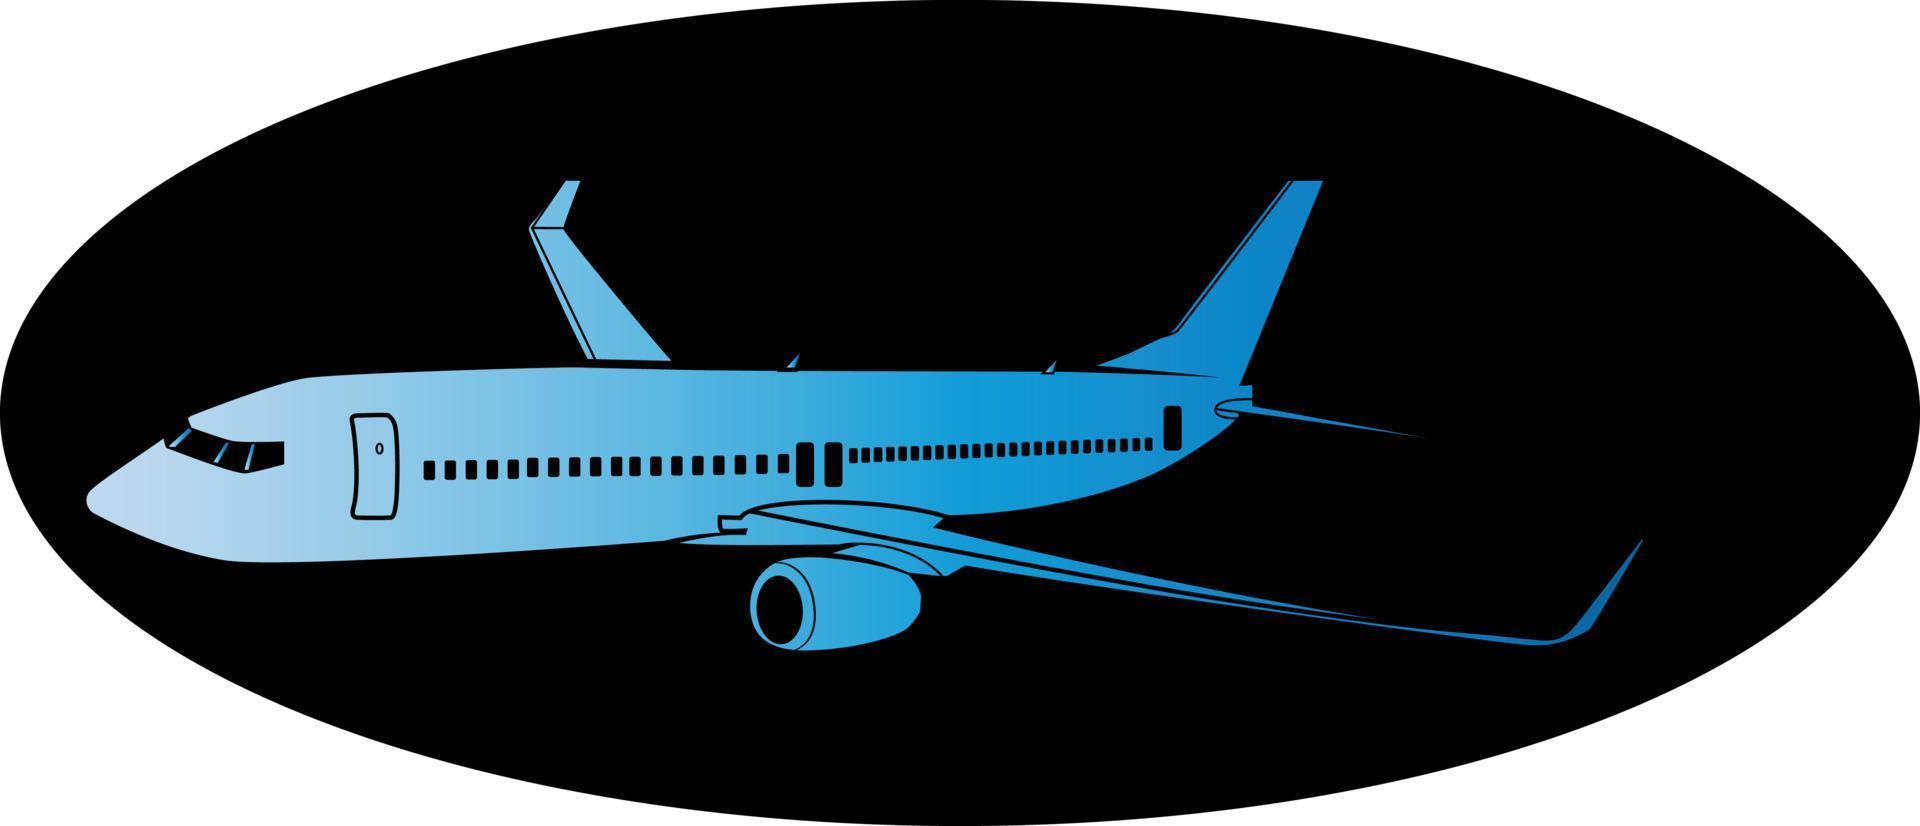 Illustration Of A Passenger Aircraft In The Air vector